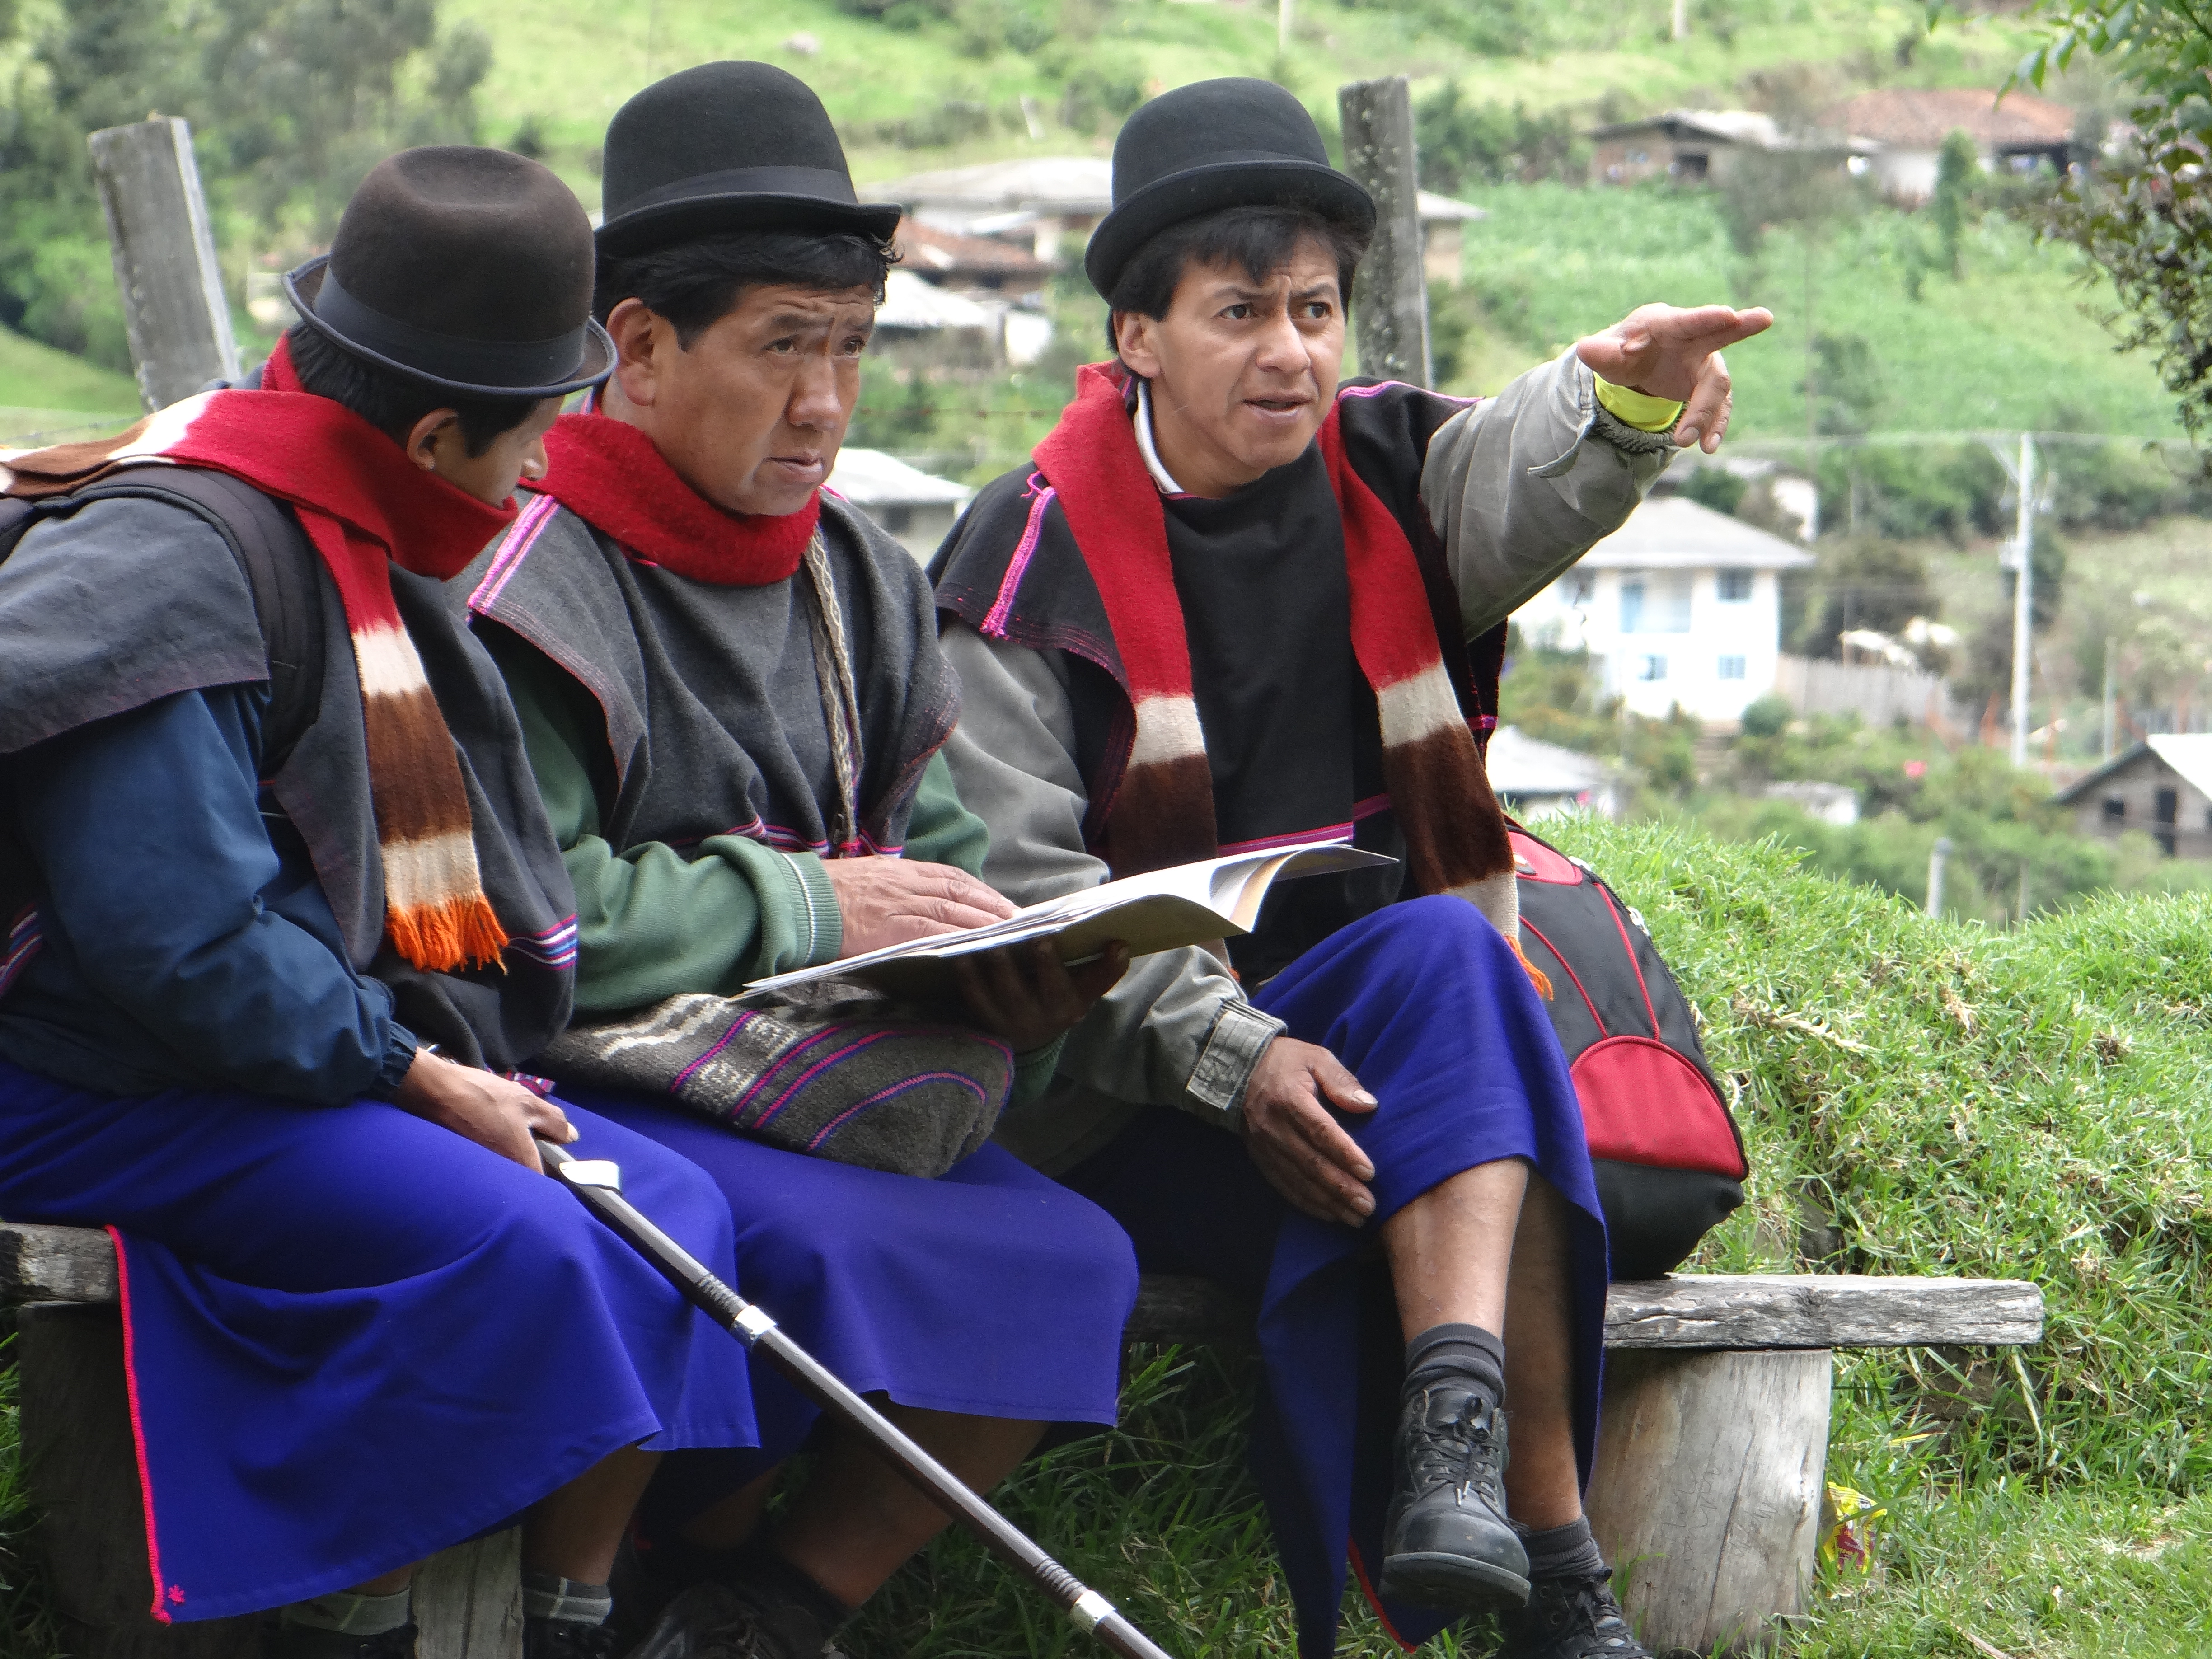 Creating strong indigenous organizations in Colombia